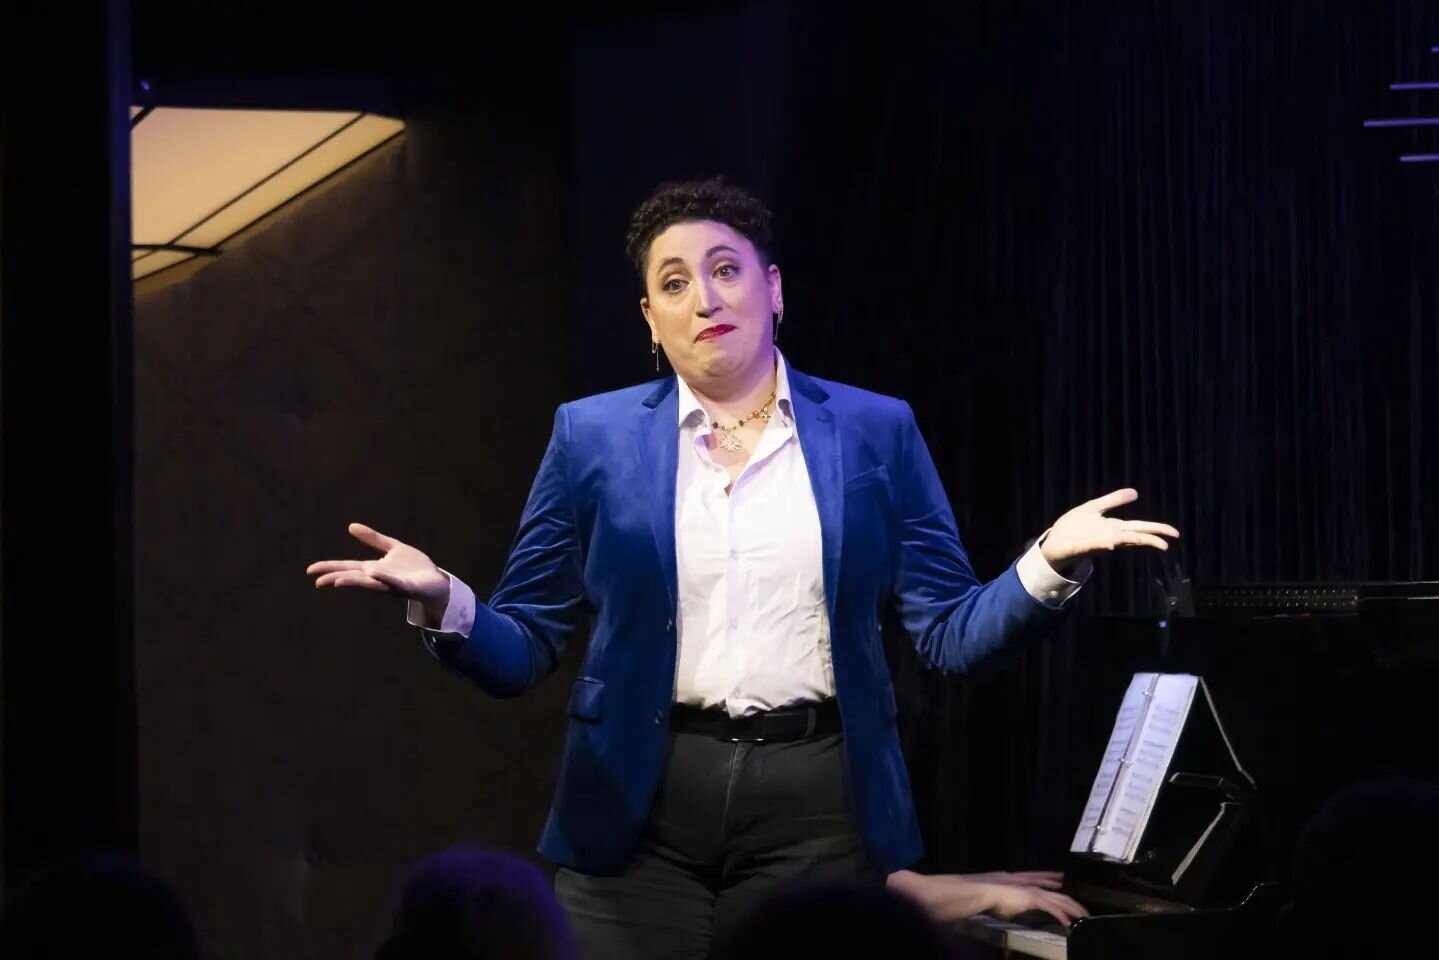 Turns out I do this with my hands a lot when I sing comedic songs.

Just got the photos from @operaidaho 's Operatini last month! What a blast fr!! I don't think Jeffrey is on Instagram but s/o Jeffrey Seppala for being the Sweeney to my Lovett for t